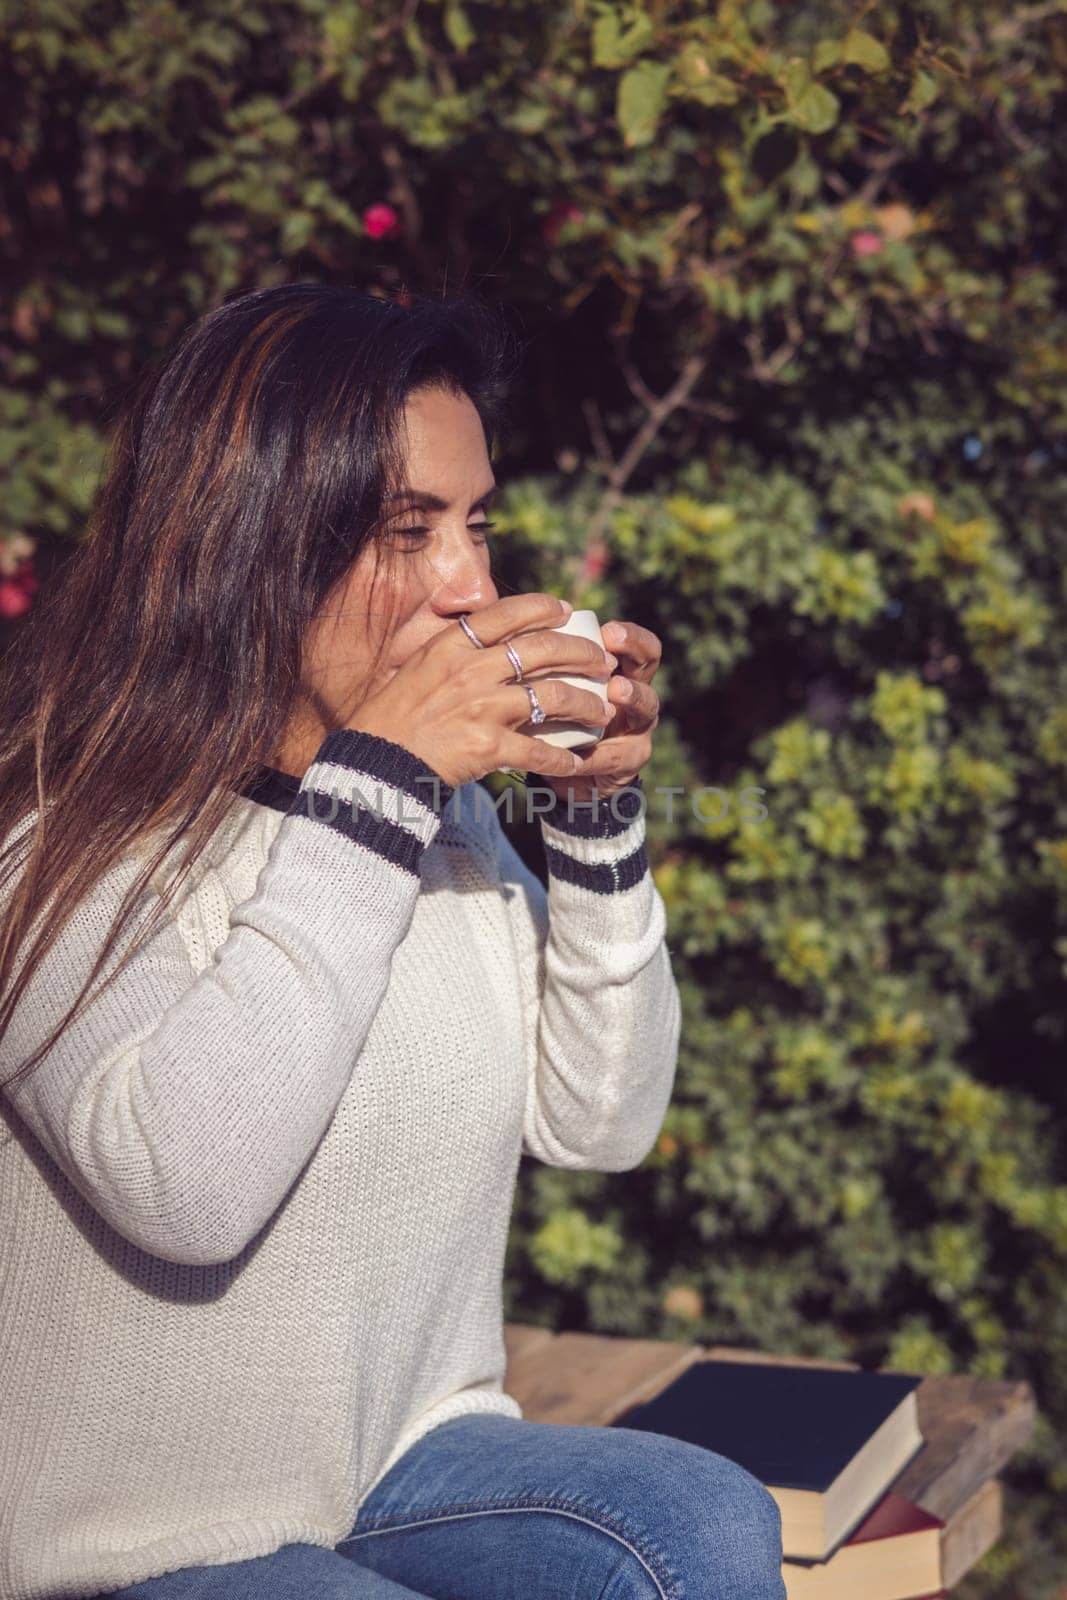 A Latina woman sits on a wooden bench in the garden, taking a sip of coffee while enjoying a moment of calm and relaxation. The natural beauty of the garden is appreciated in the background, creating a harmonious and peaceful atmosphere.